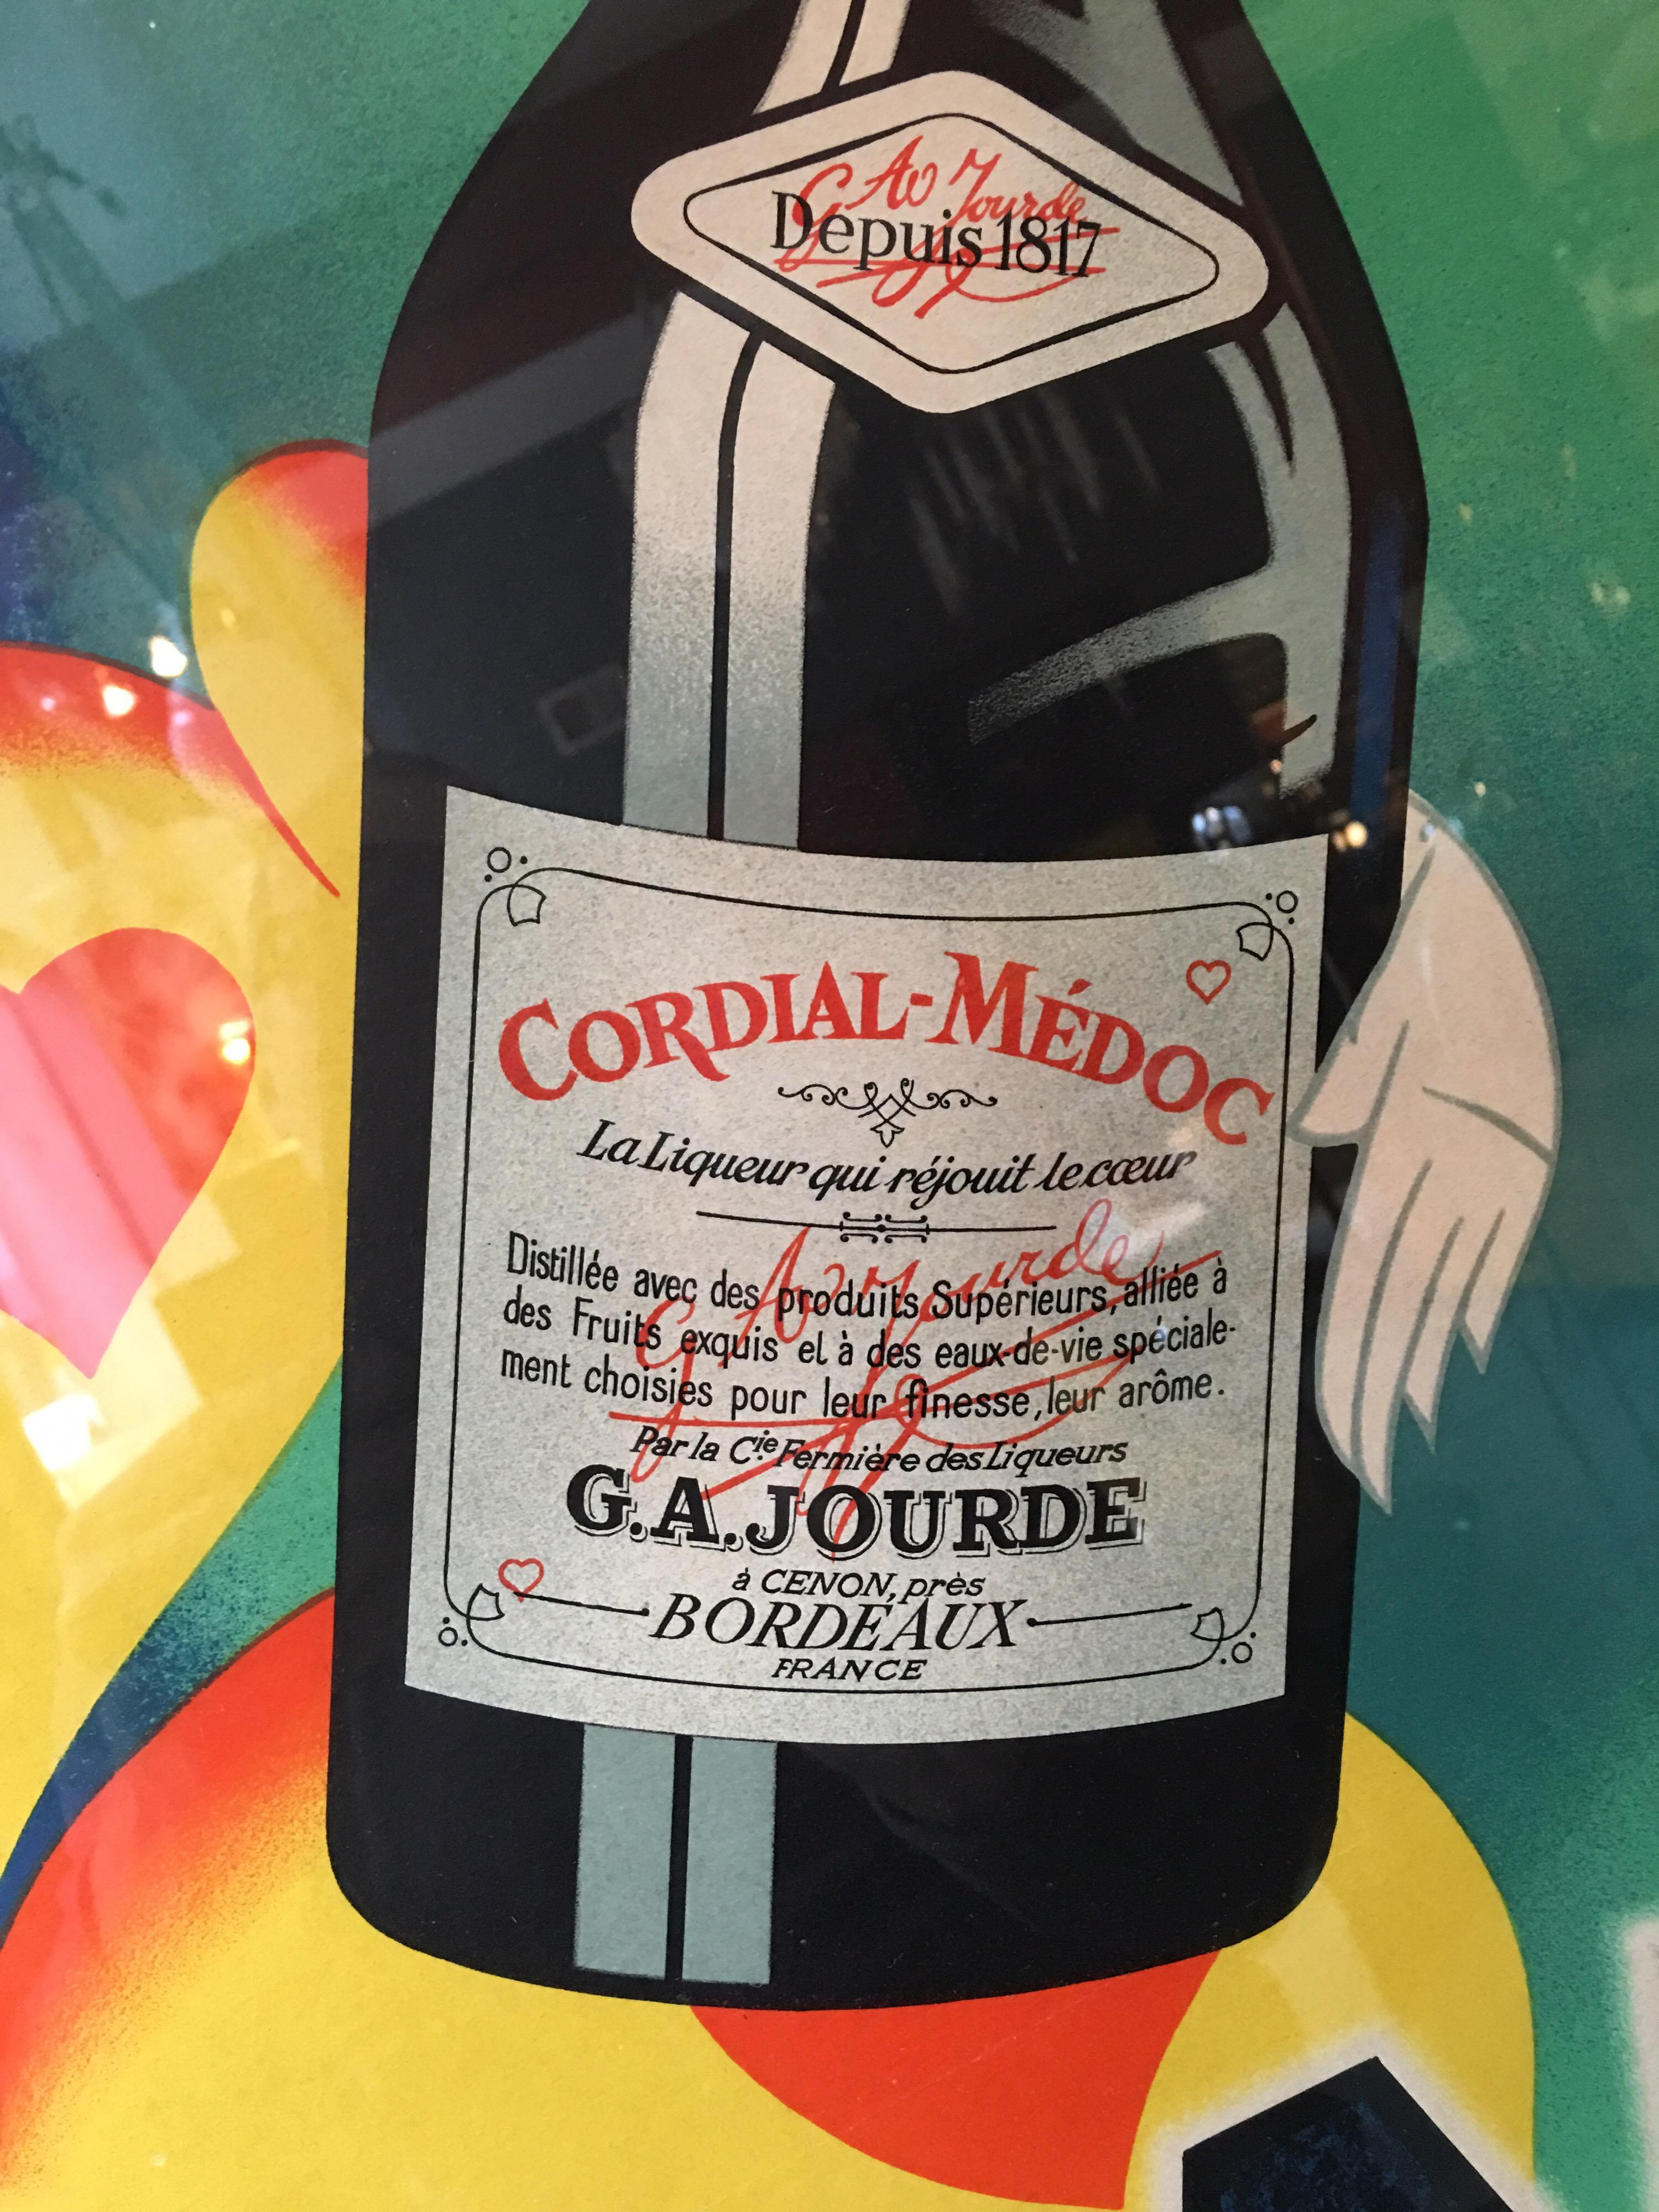 Paper Liqueur Cordial-Medoc French Poster